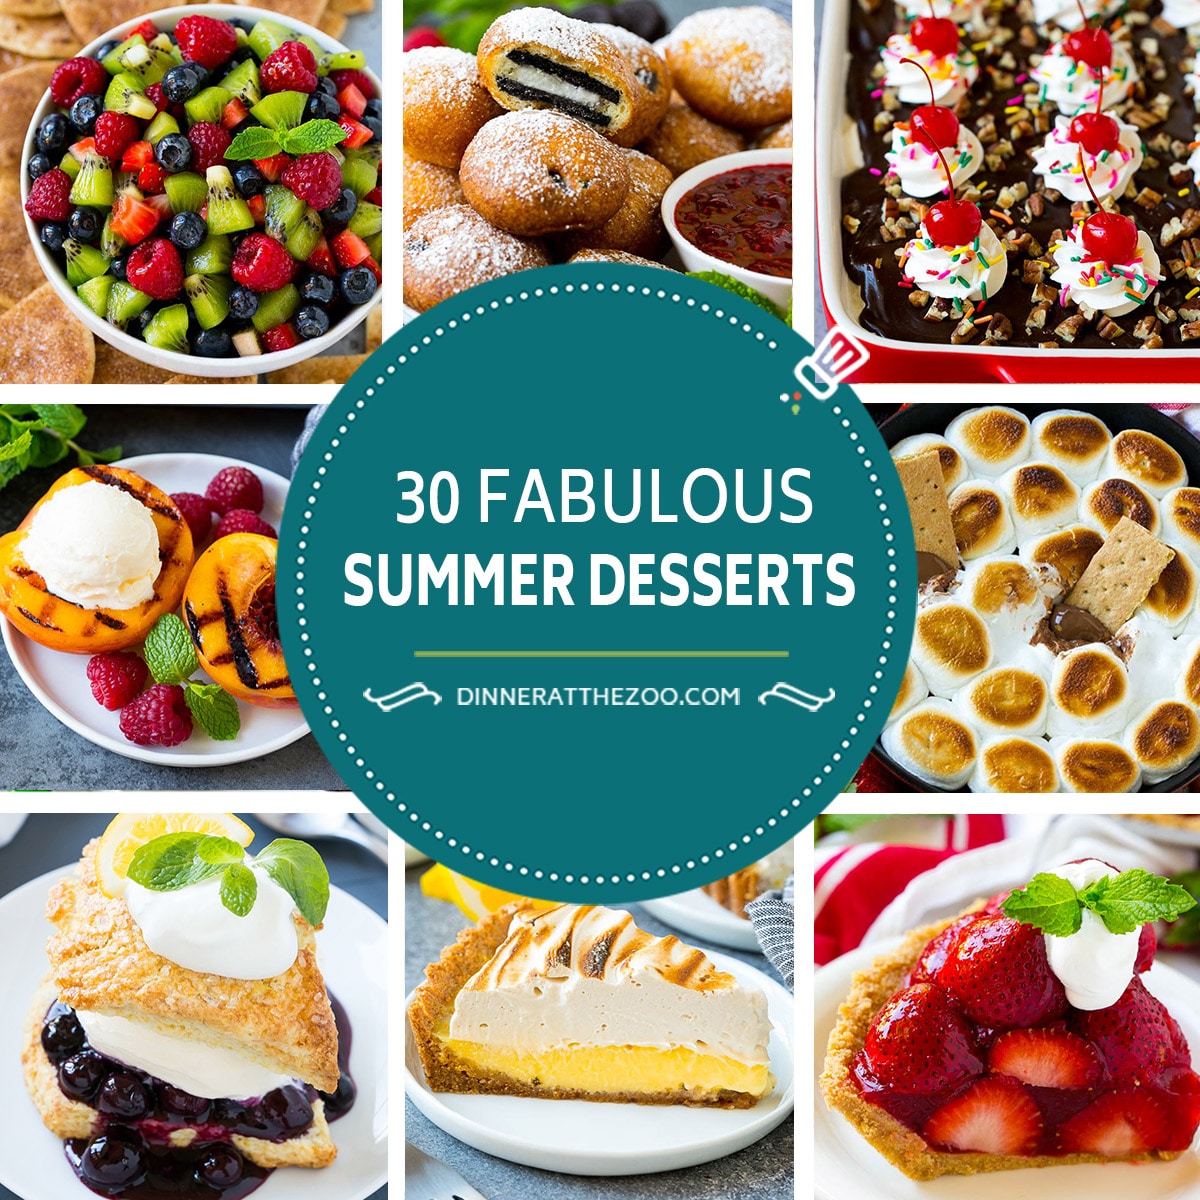 A collection of 30 fabulous summer dessert recipes.